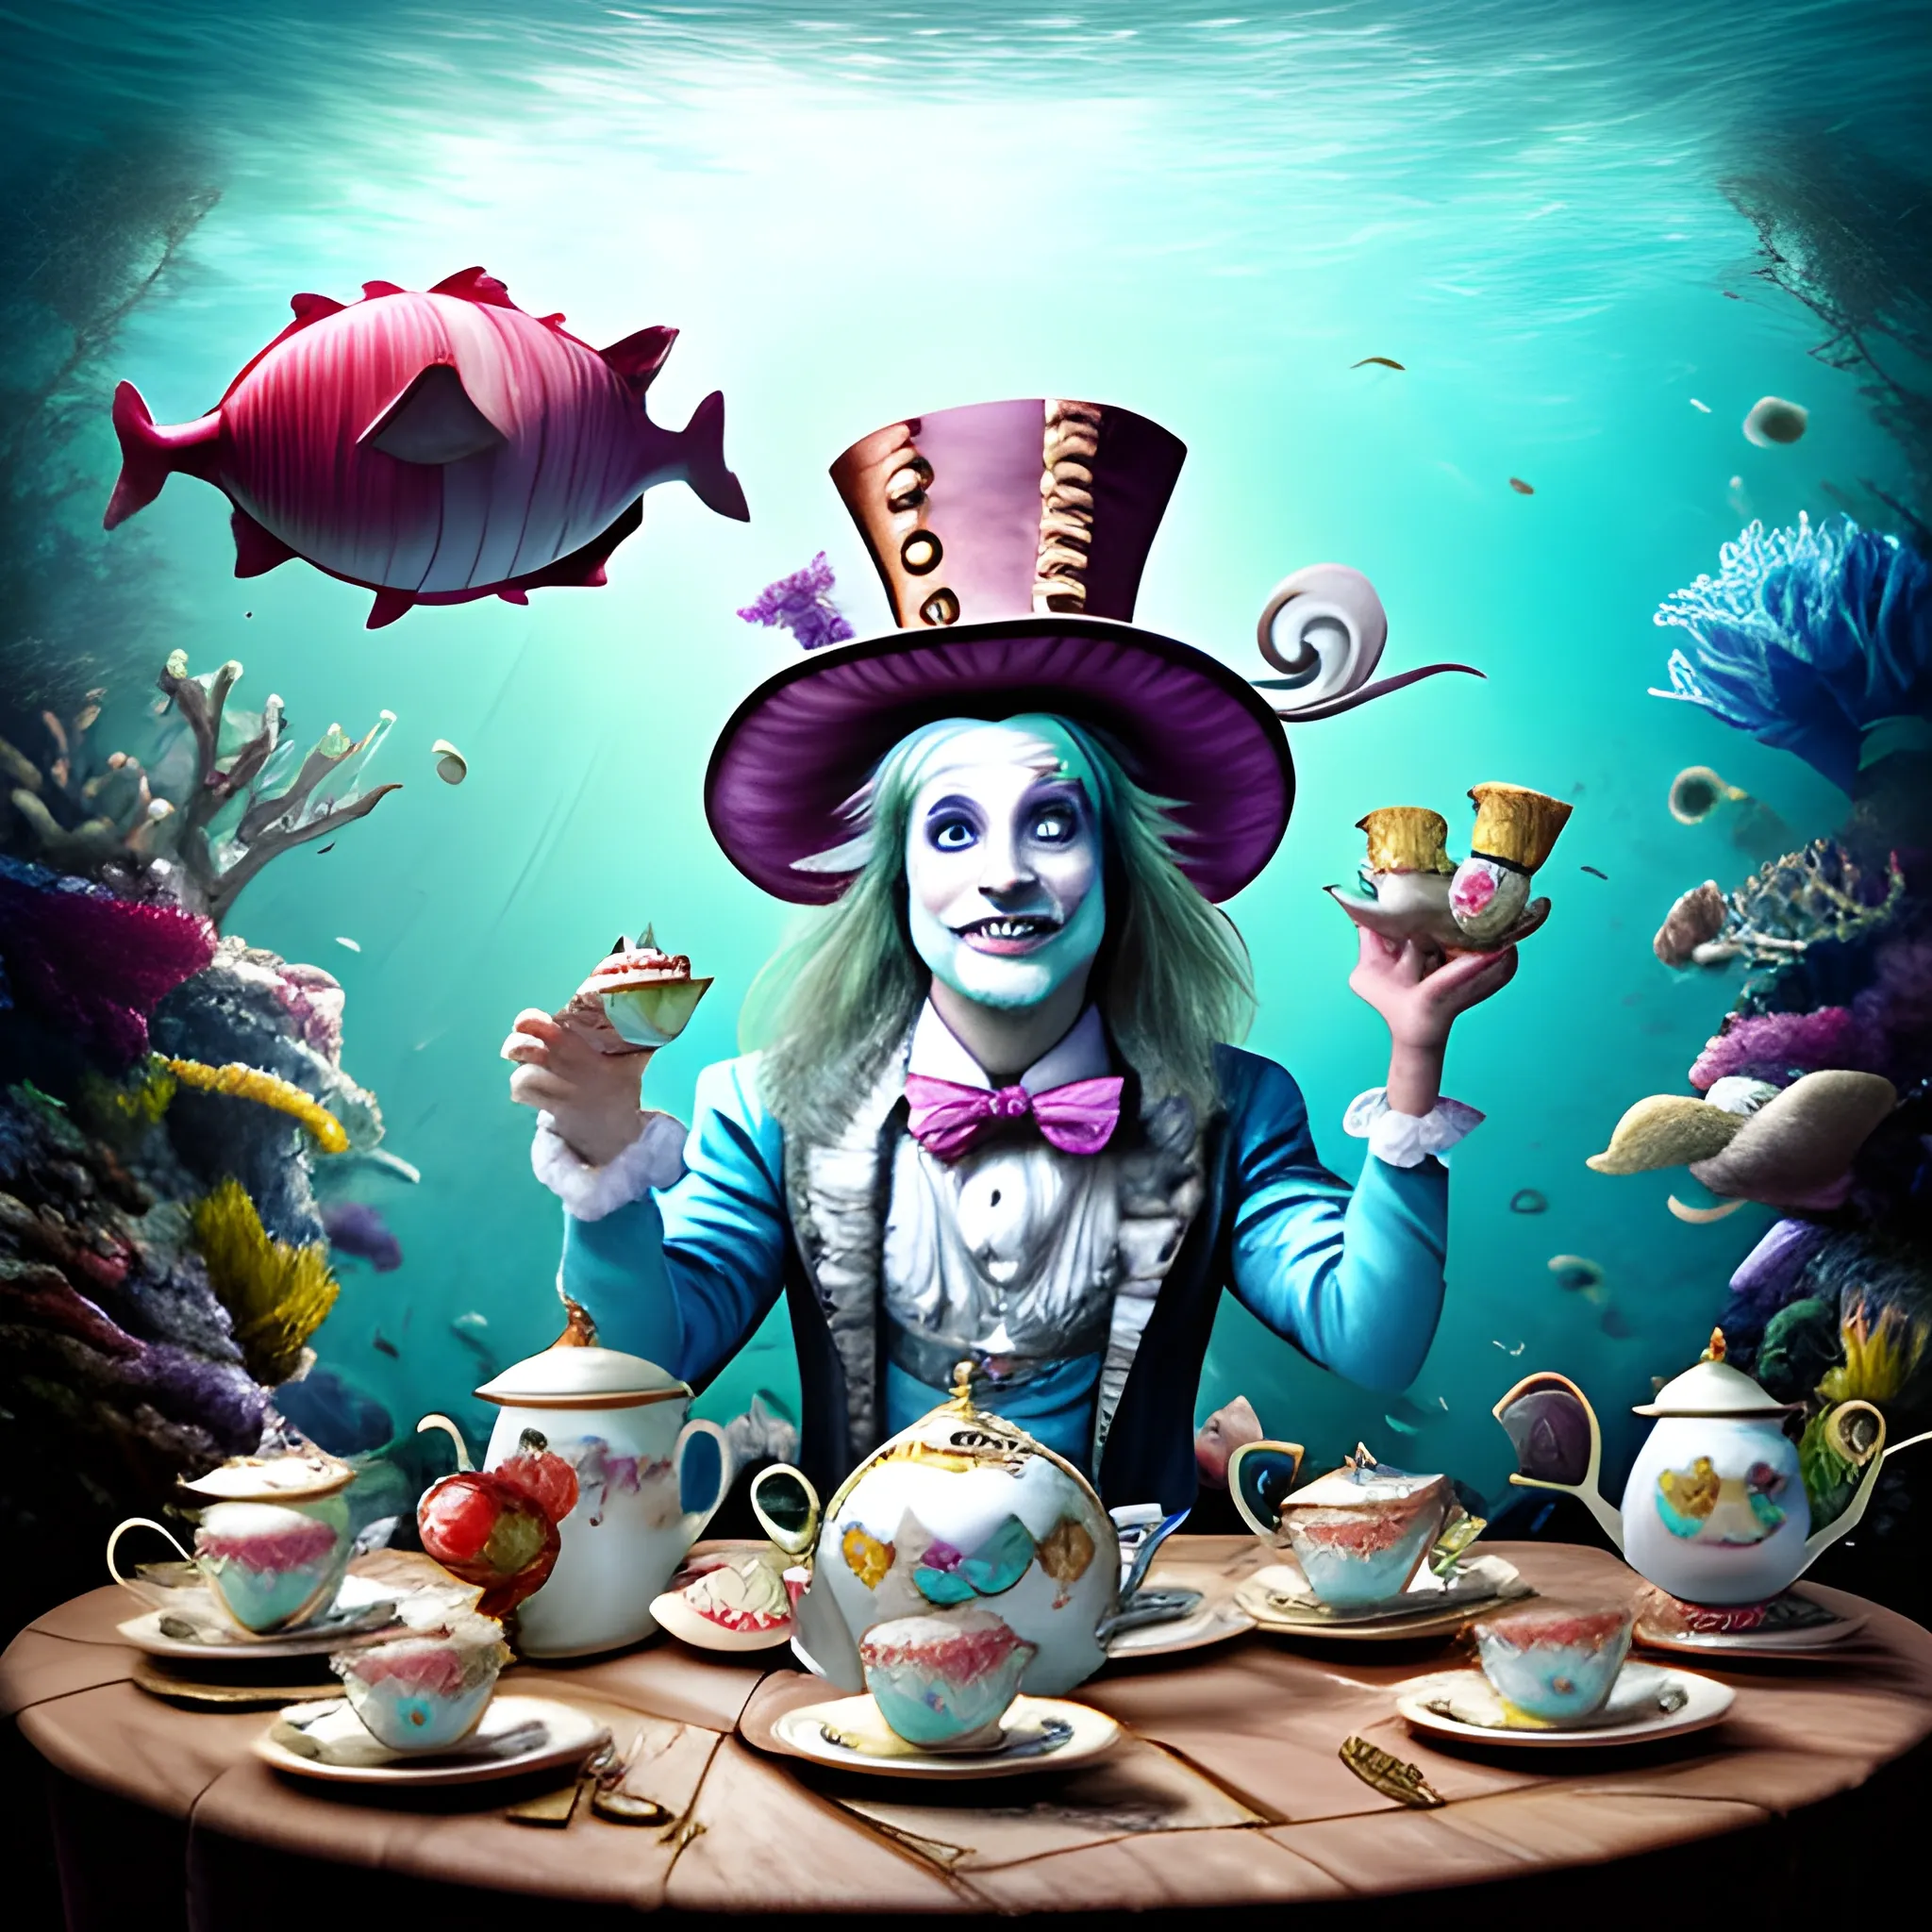 Mad hatter's tea party with Alice and the Hatter underwater with sea creatures